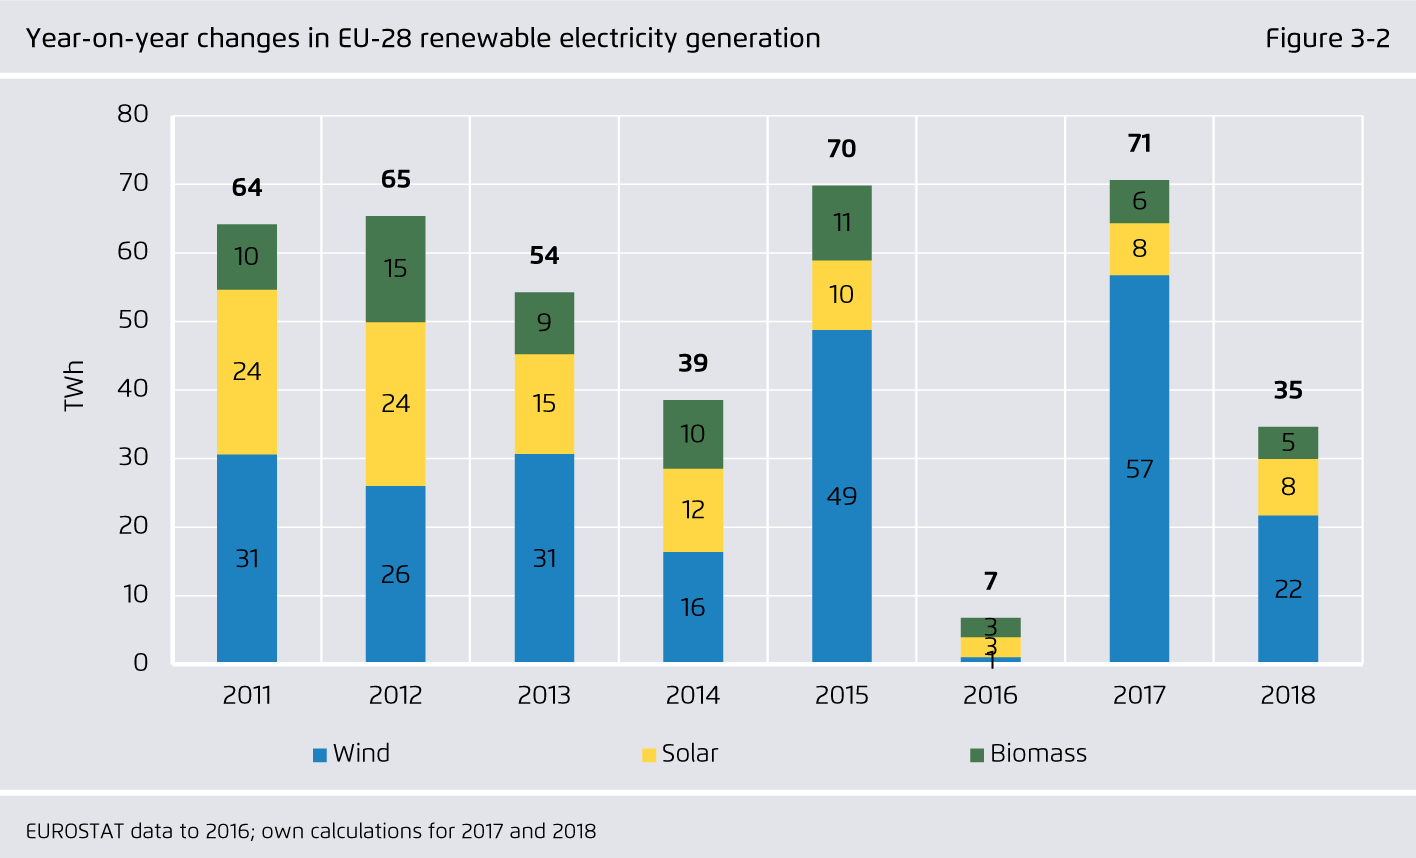 Preview for Year-on-year changes in EU-28 renewable electricity generation